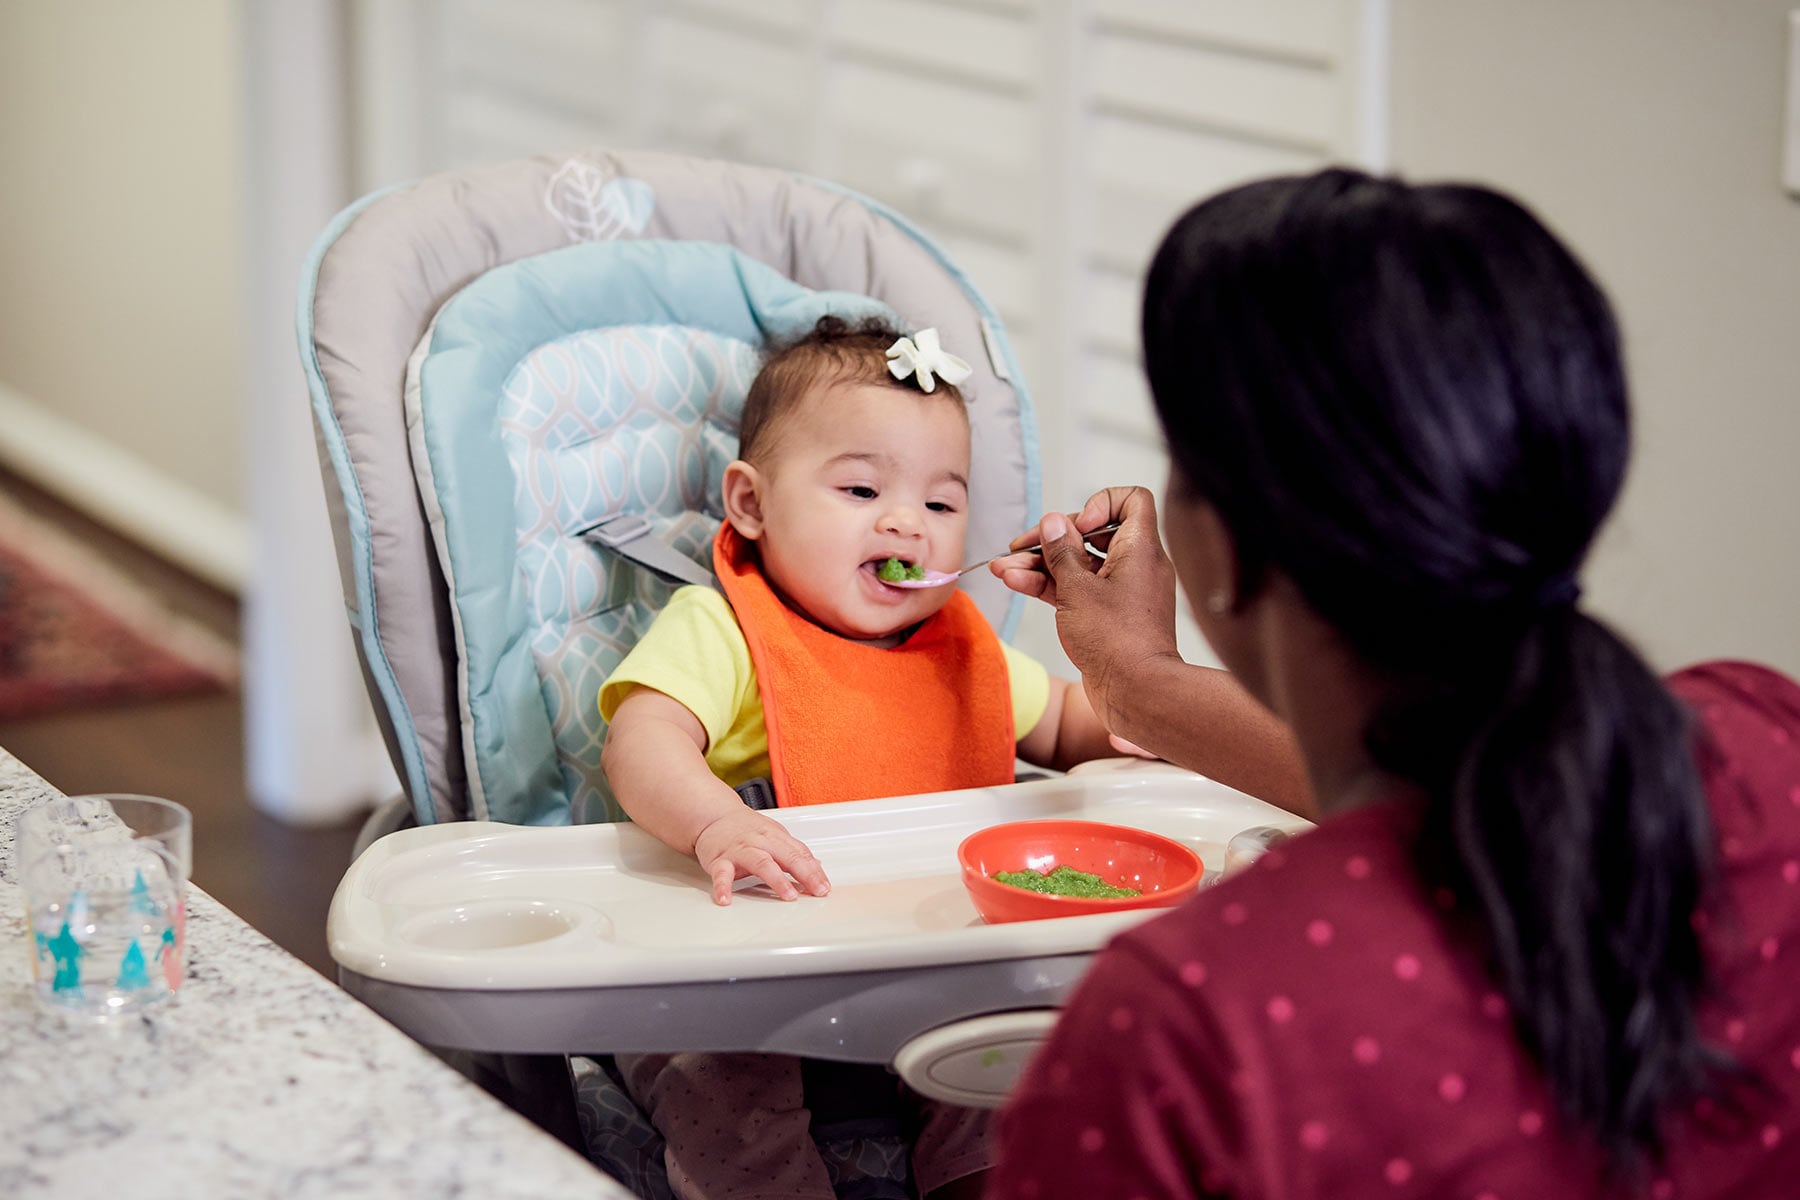 Baby Feeding: How to Ensure a Healthy Diet for Your Infant